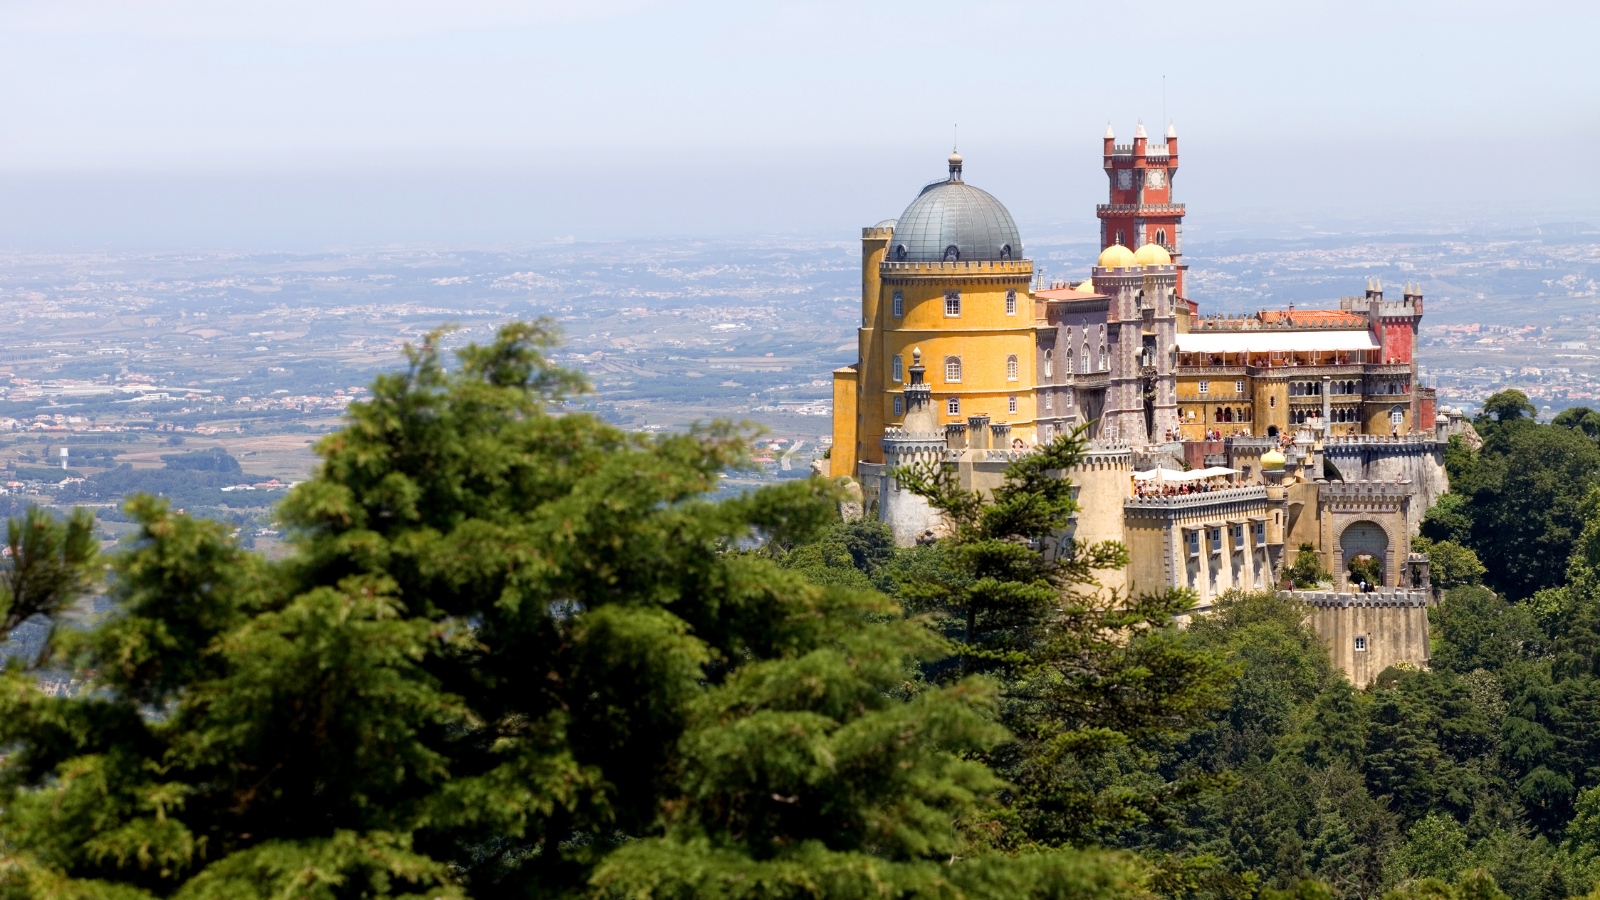 Visit beautiful Sintra - the second thing in the list of 10 best things to do in Portugal